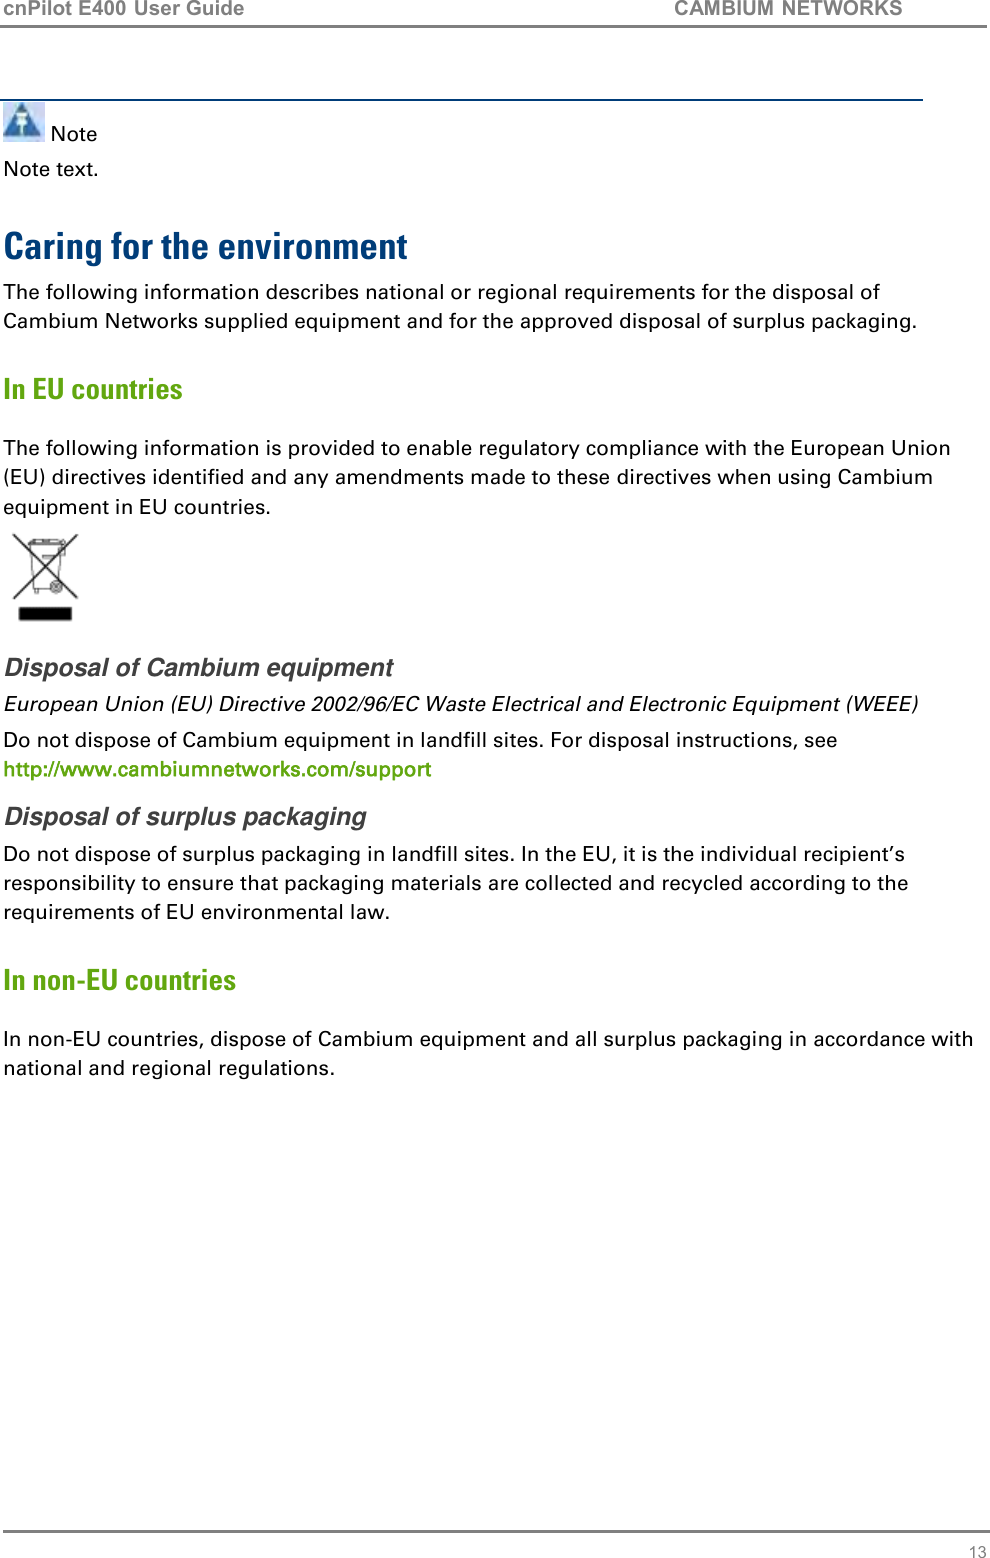 cnPilot E400 User Guide           CAMBIUM NETWORKS   13  Note Note text.  Caring for the environment The following information describes national or regional requirements for the disposal of Cambium Networks supplied equipment and for the approved disposal of surplus packaging. In EU countries The following information is provided to enable regulatory compliance with the European Union (EU) directives identified and any amendments made to these directives when using Cambium equipment in EU countries.  Disposal of Cambium equipment European Union (EU) Directive 2002/96/EC Waste Electrical and Electronic Equipment (WEEE) Do not dispose of Cambium equipment in landfill sites. For disposal instructions, see http://www.cambiumnetworks.com/support Disposal of surplus packaging Do not dispose of surplus packaging in landfill sites. In the EU, it is the individual recipient’s responsibility to ensure that packaging materials are collected and recycled according to the requirements of EU environmental law. In non-EU countries In non-EU countries, dispose of Cambium equipment and all surplus packaging in accordance with national and regional regulations.   